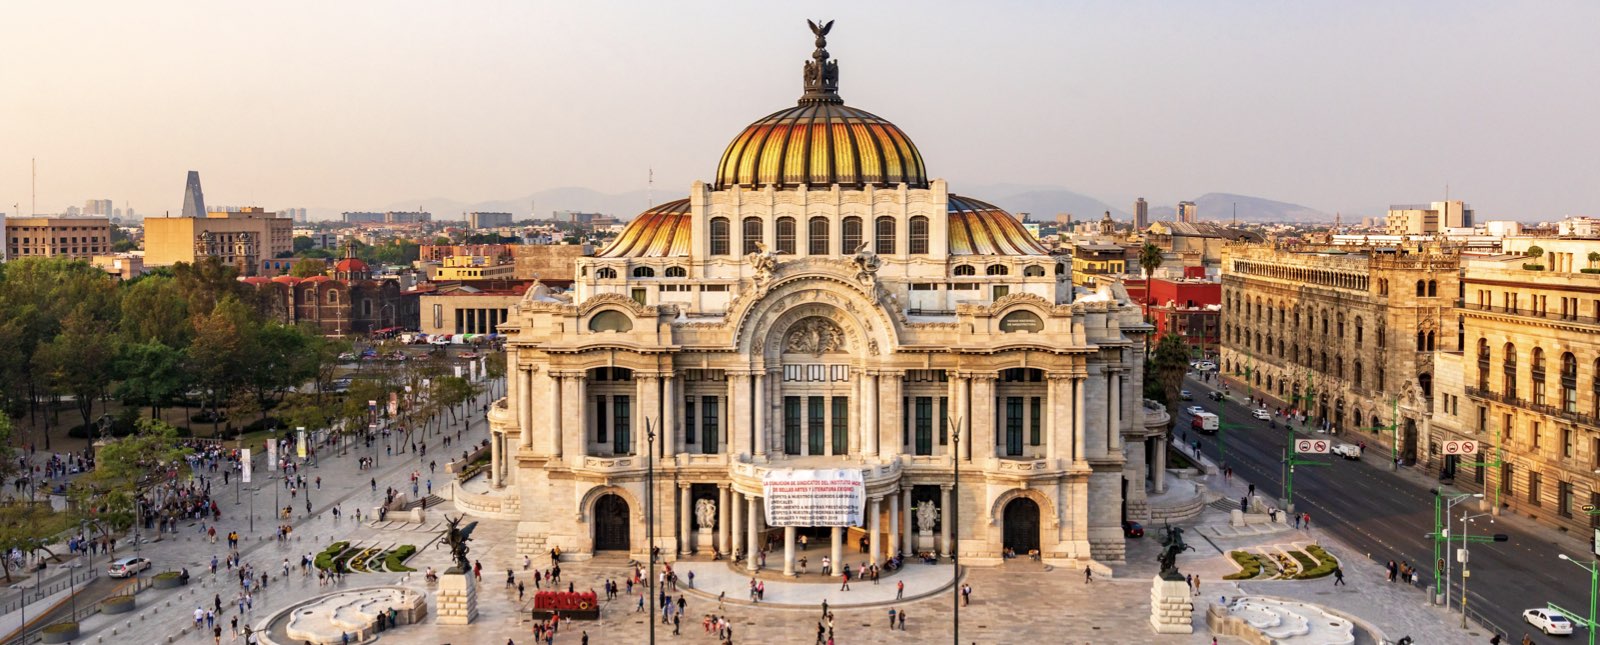 27 Facts You Didn't Know About Mexico City - Travel